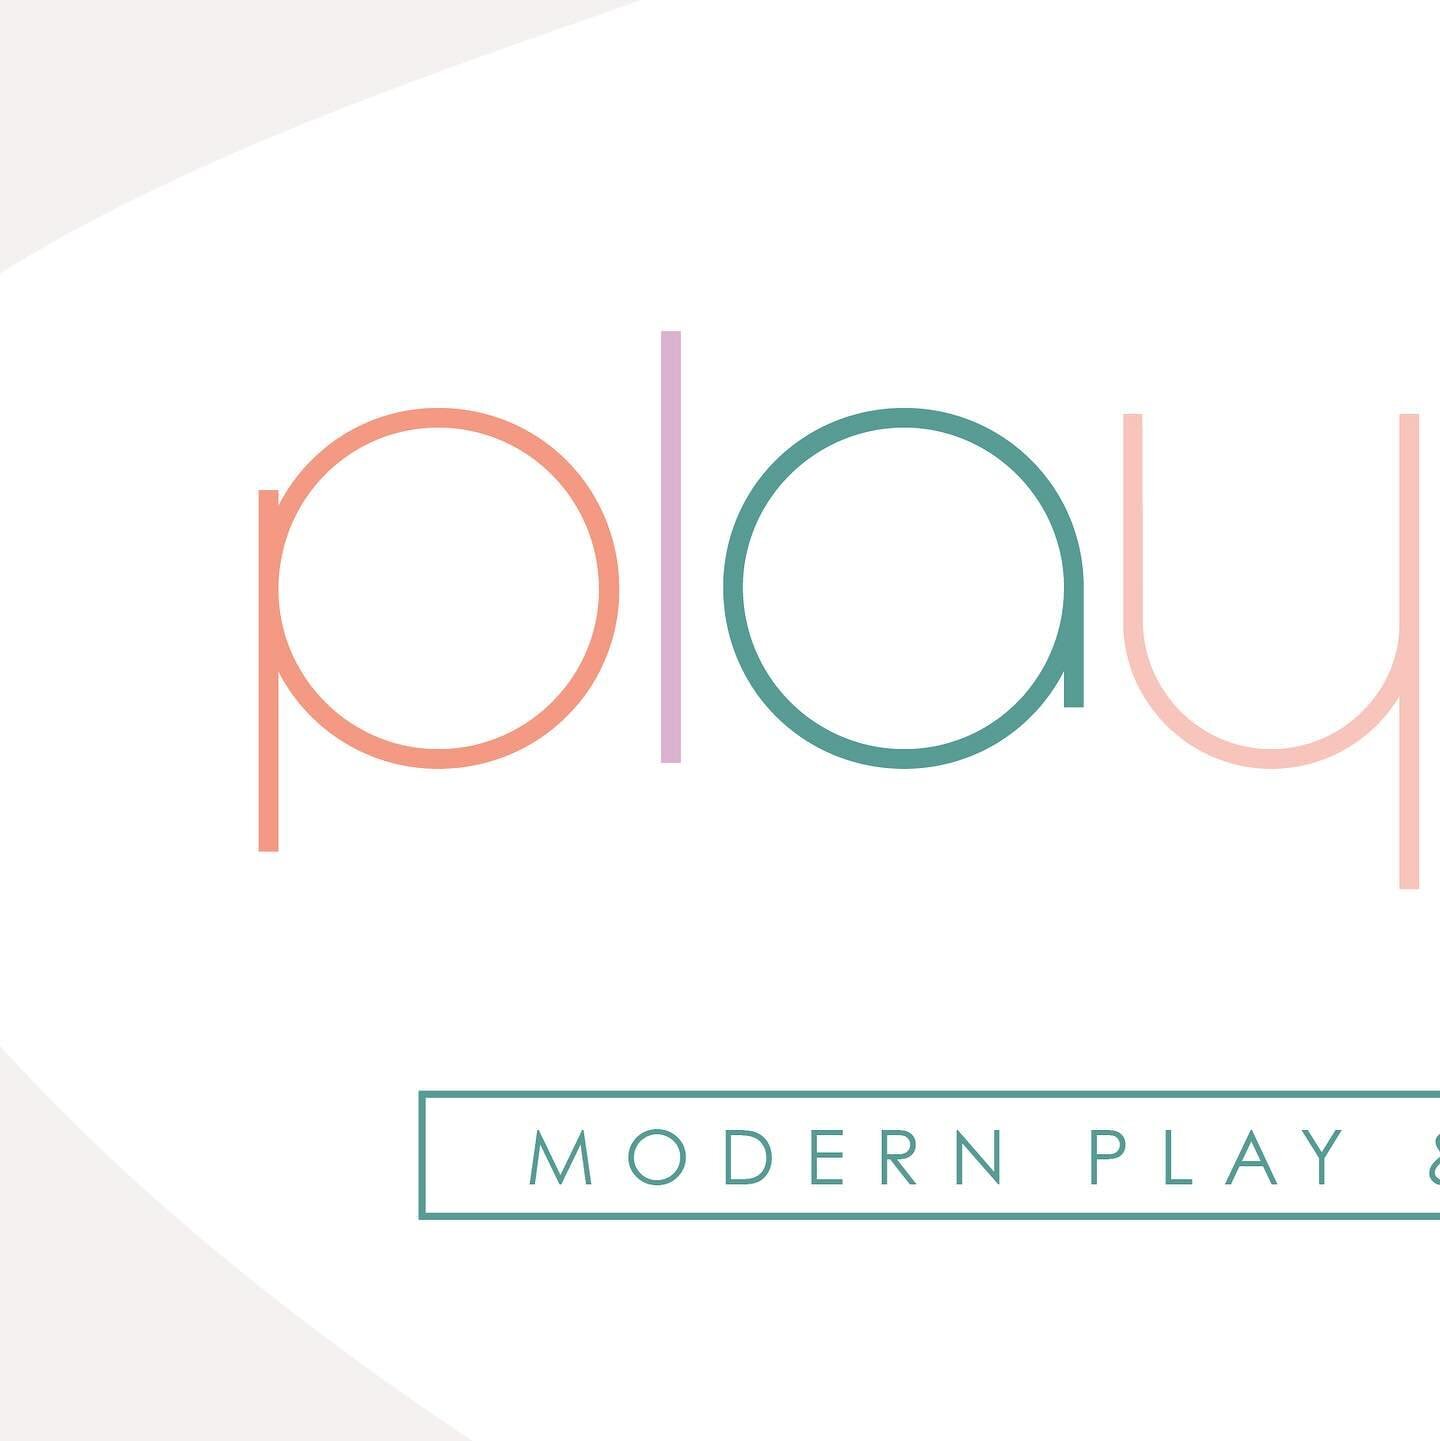 Our newest adventure is coming soon: @playpodmiami

A modern indoor baby playground and party space designed for babies and toddlers ages 1-5 by @pipaandbelu. Inspired by the Montessori and Reggio Emilia philosophies.

Our dream come true!!

We&rsquo